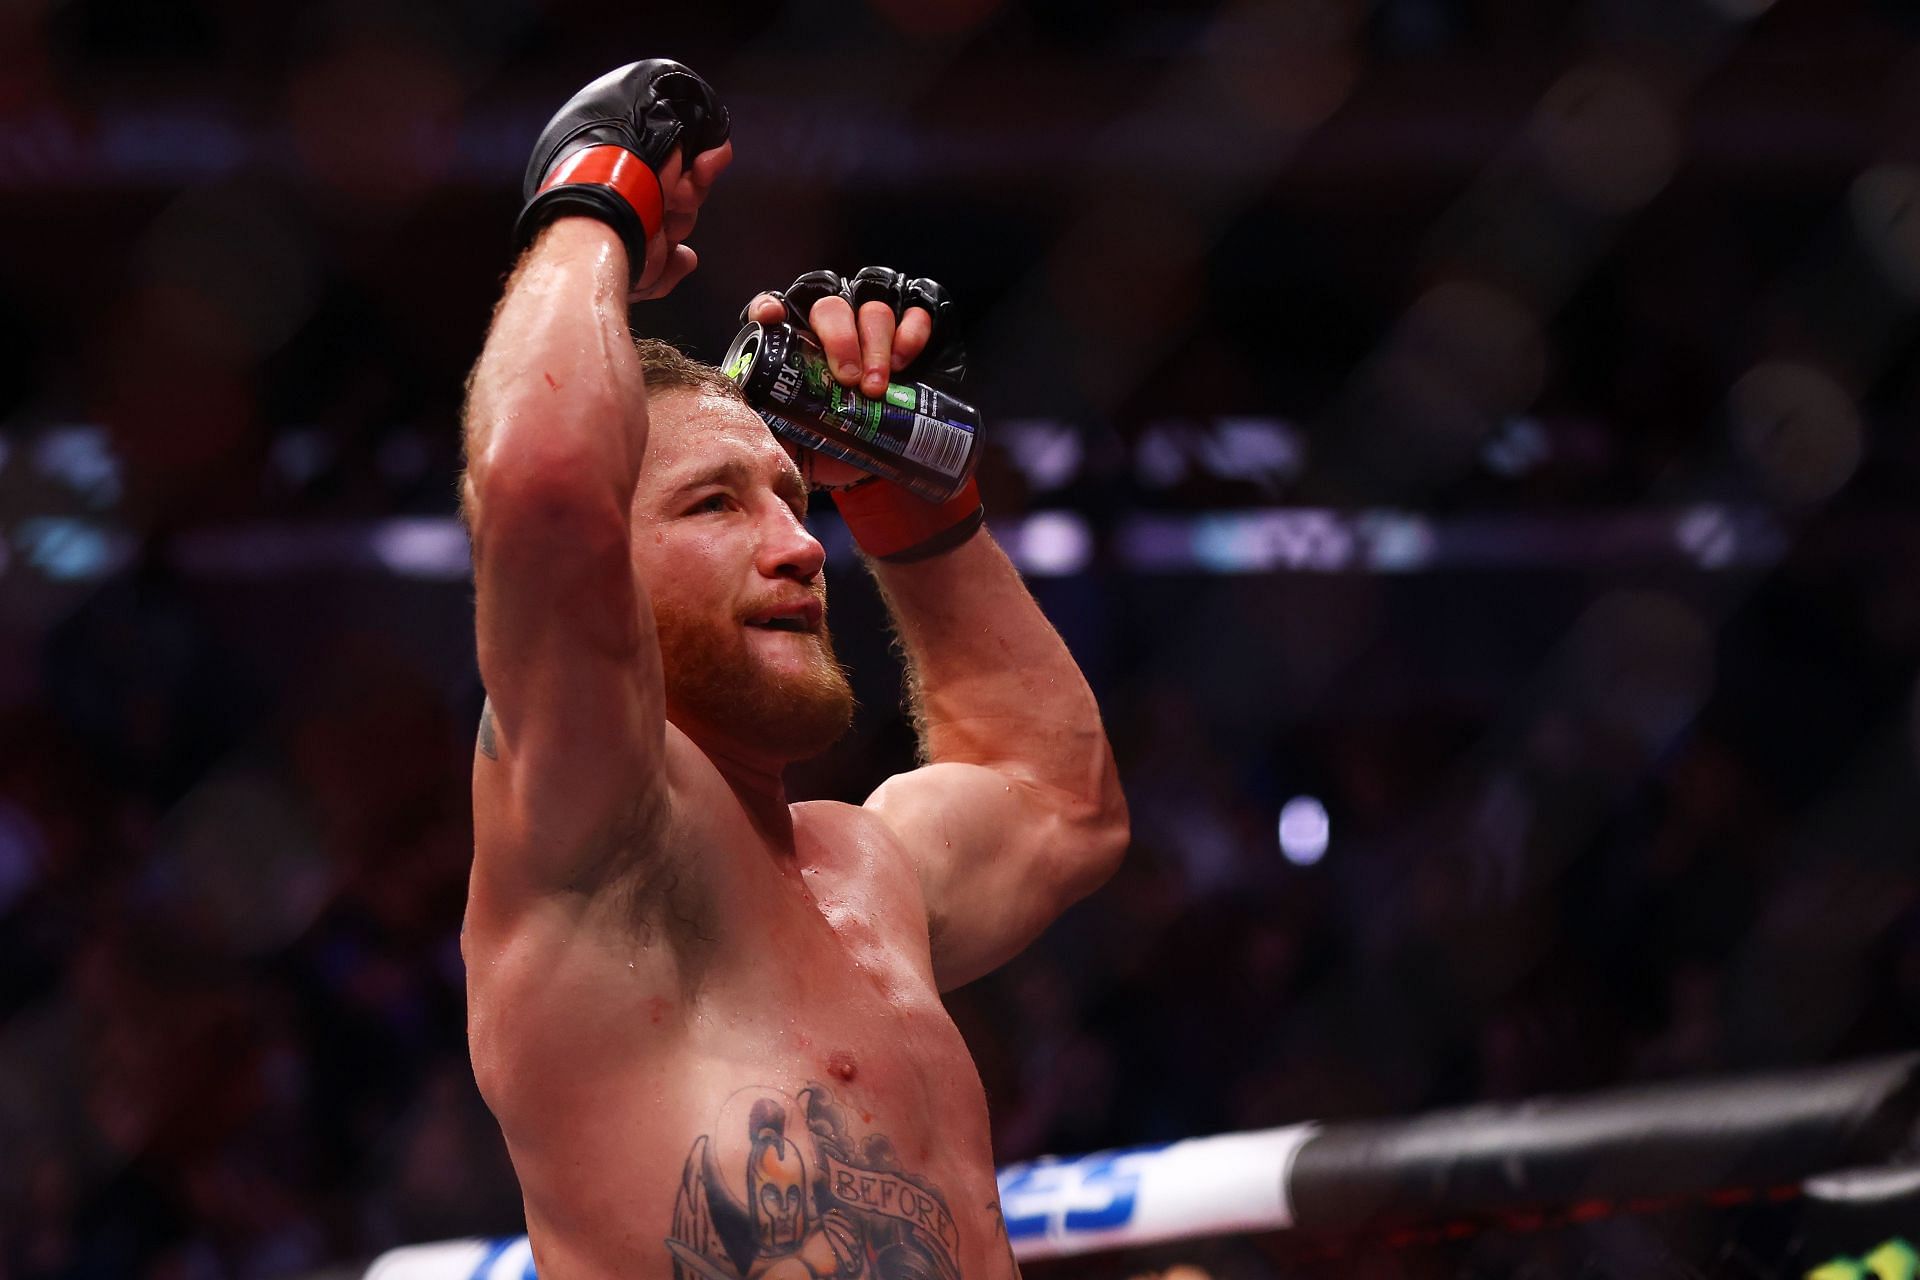 Justin Gaethje was victorious at UFC 268